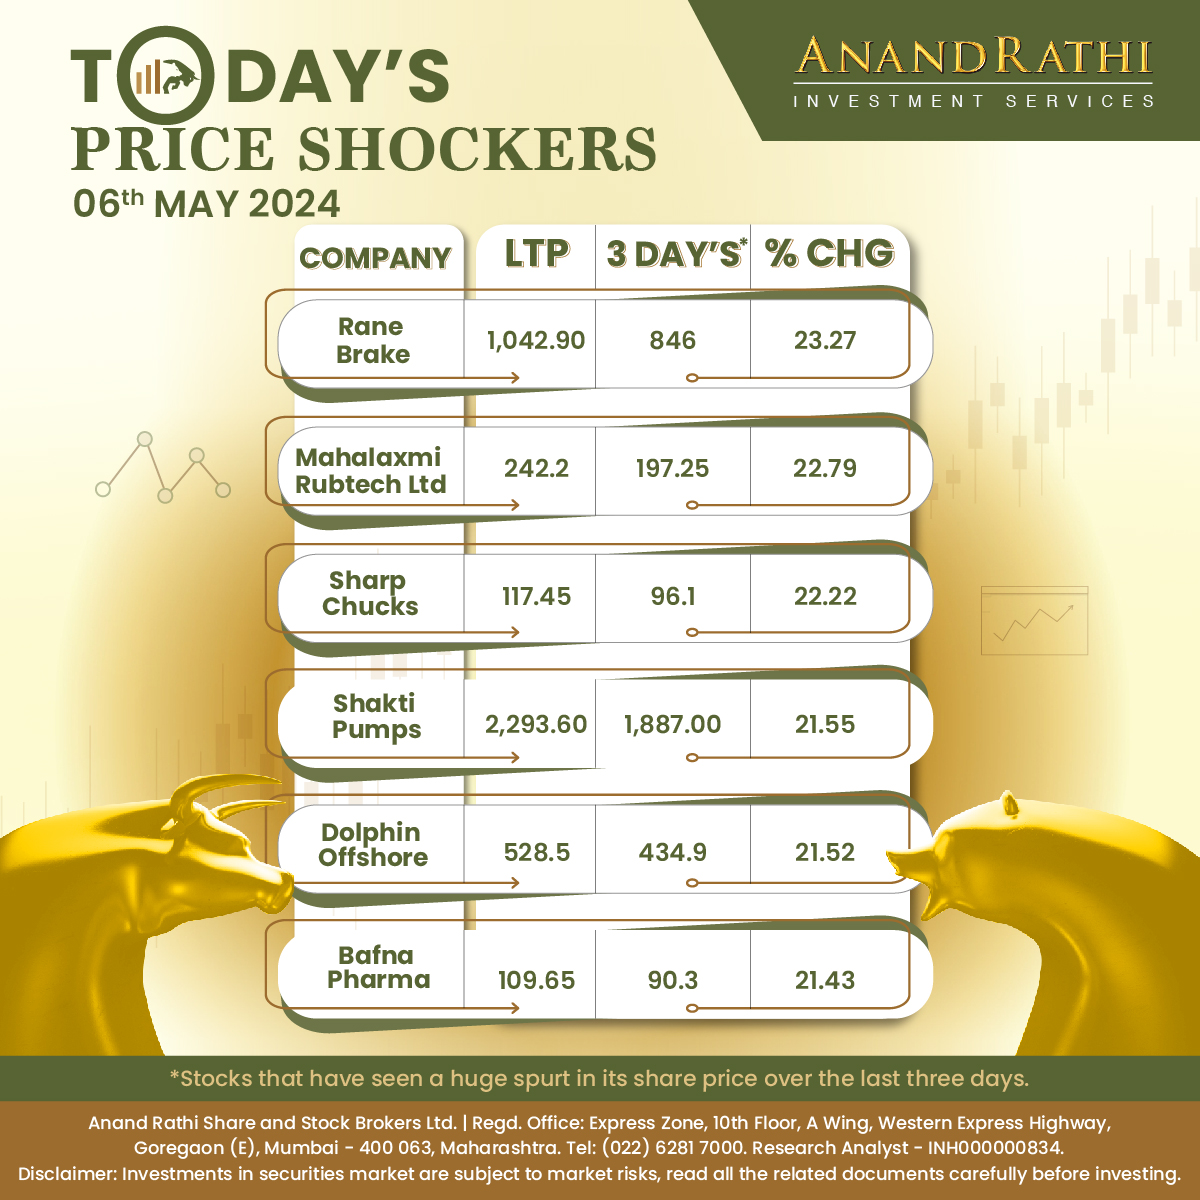 Take a glimpse of Today's Price Shockers 

#AnandRathi #Stockbroker #stockmarket #stocks #investing #trading #investment #money #finance #nifty

Disc: bit.ly/ARDisclaimerRe…